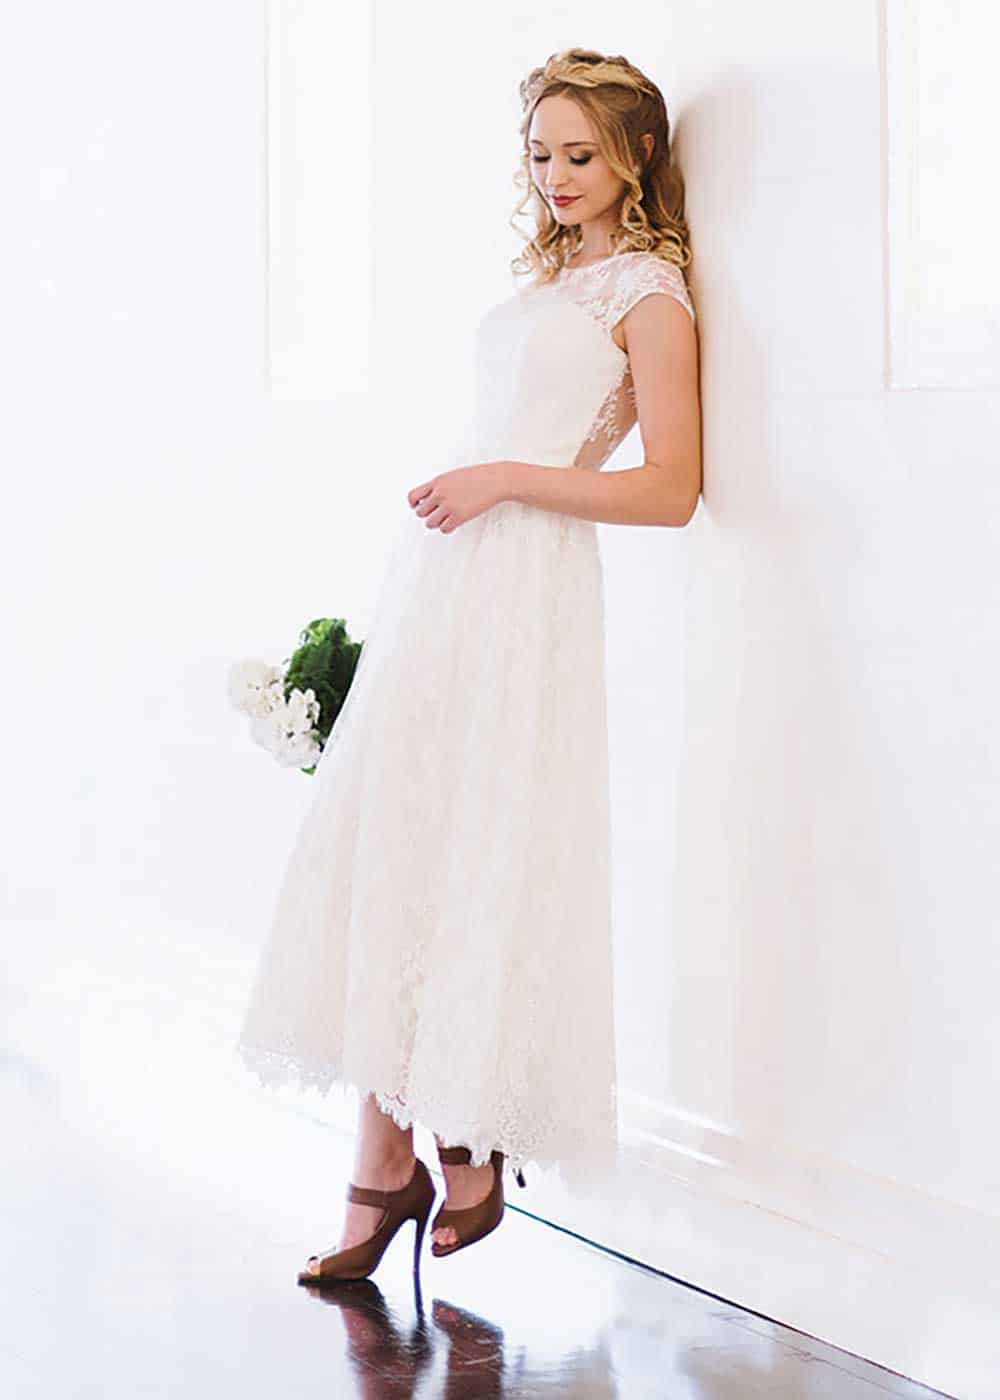 "Zoe" gown from the Ready-to-Wear Collection by Wendy Makin Bridal Designs.